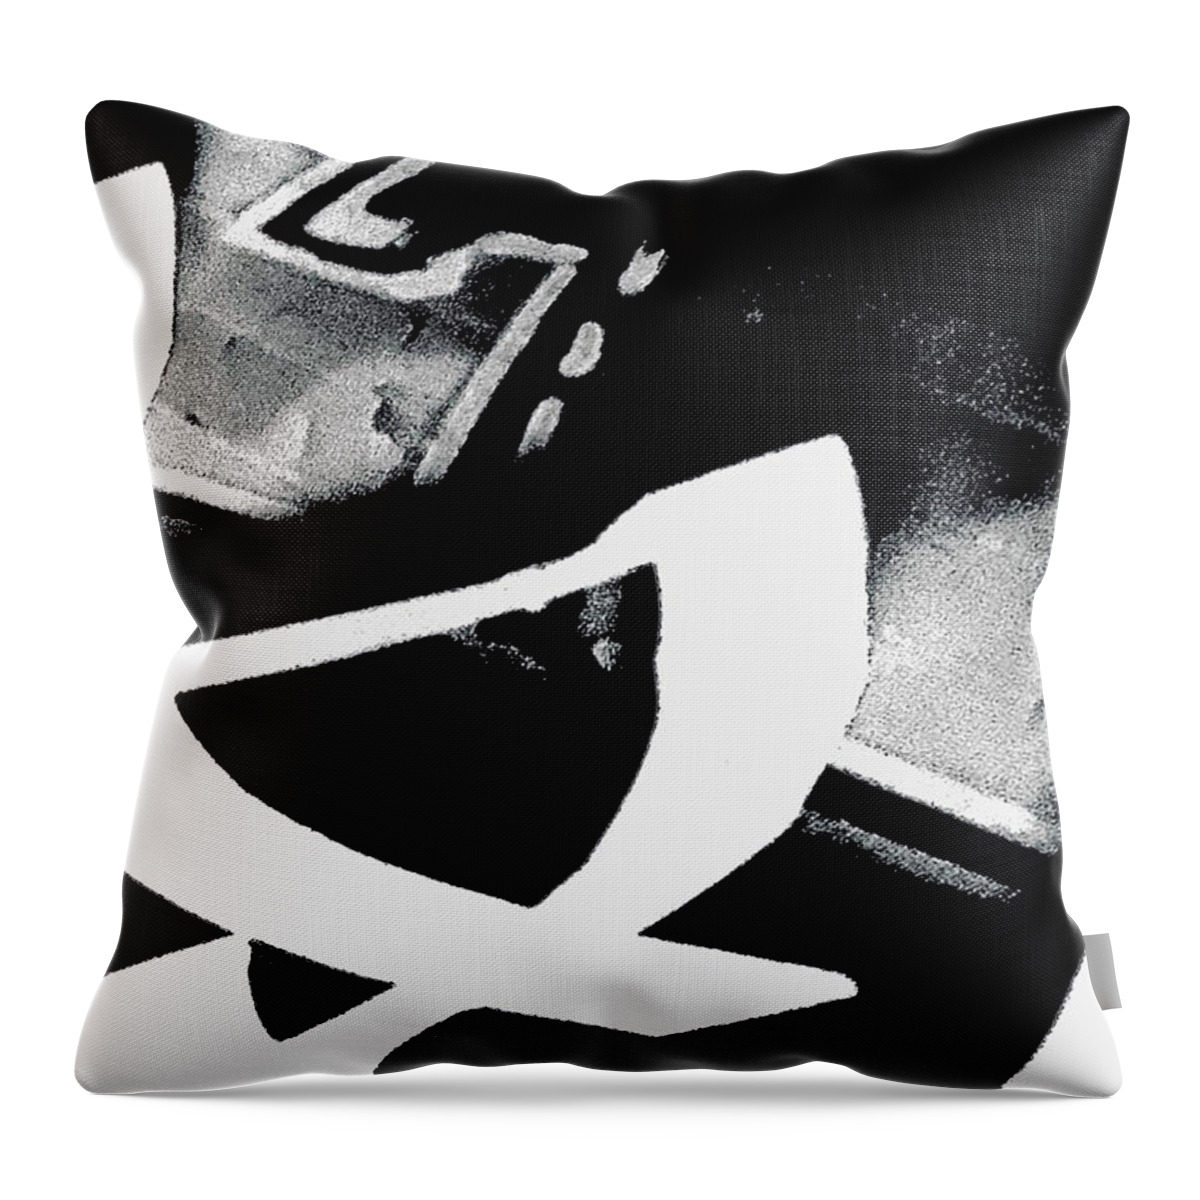  Throw Pillow featuring the photograph Black Magic by Michelle Hoffmann